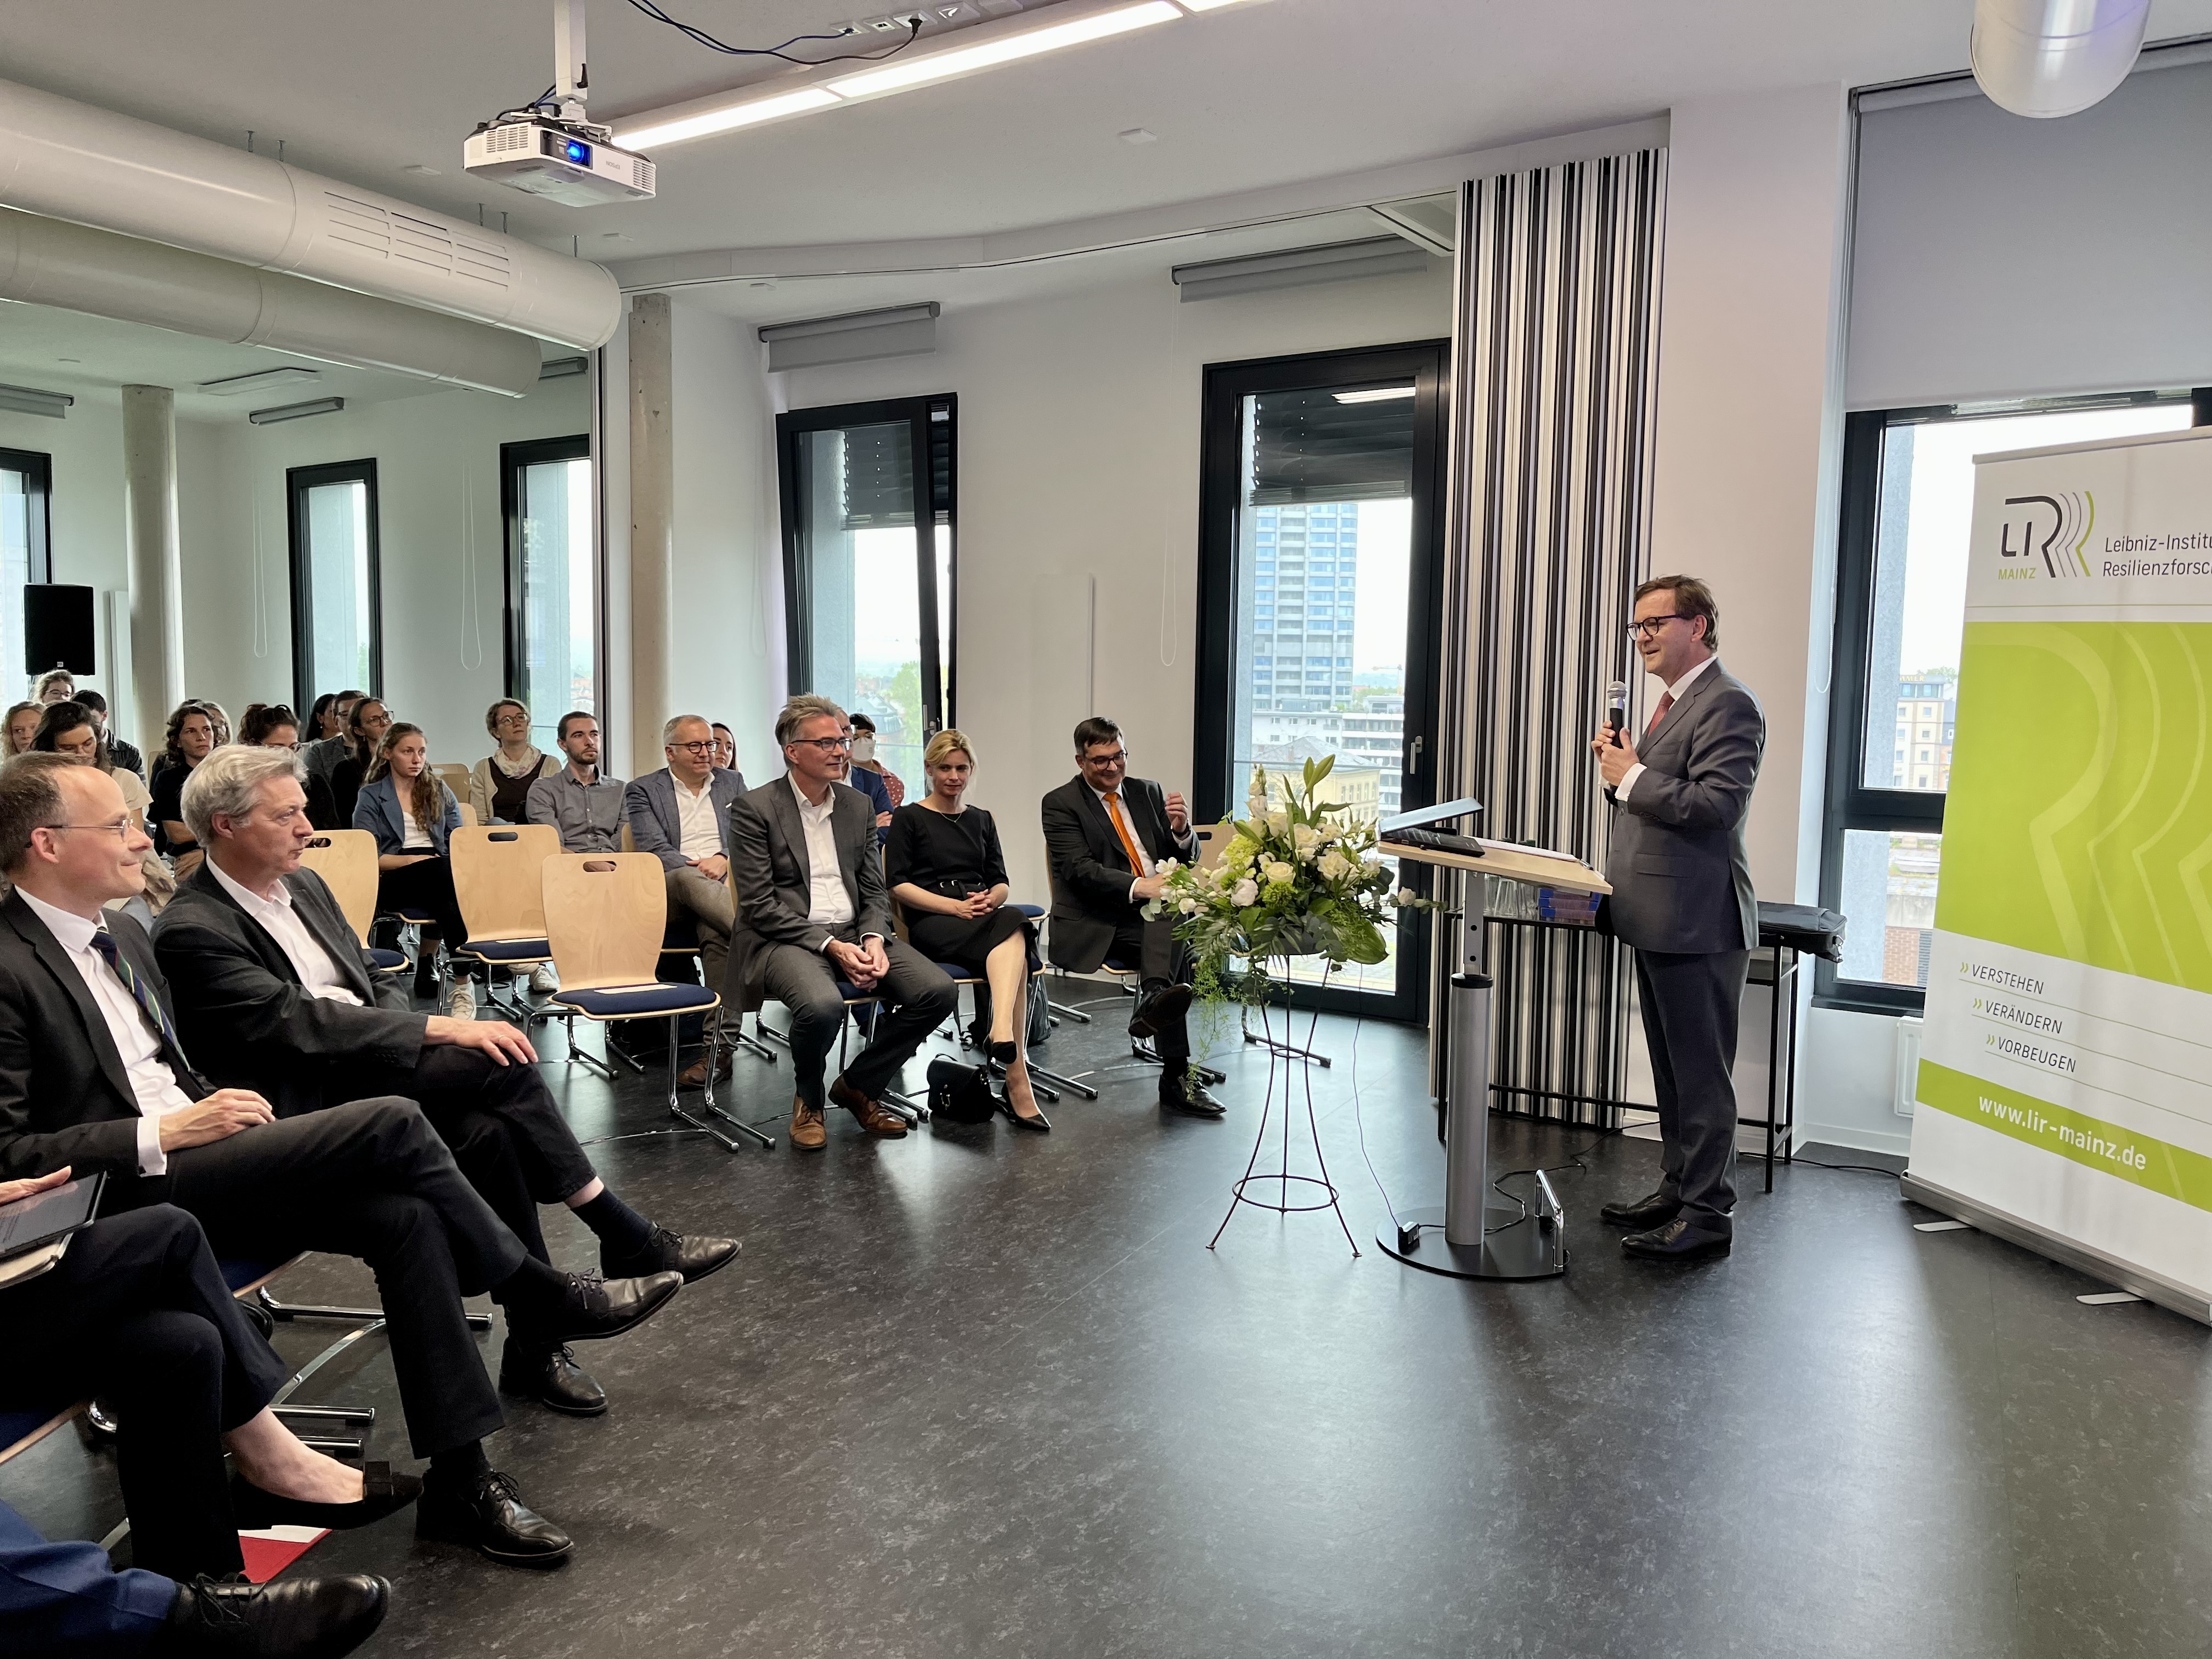 LEIBNIZ INSTITUTE FOR RESILIENCE RESEARCH (LIR) CELEBRATES ITS 5TH ANNIVERSARY